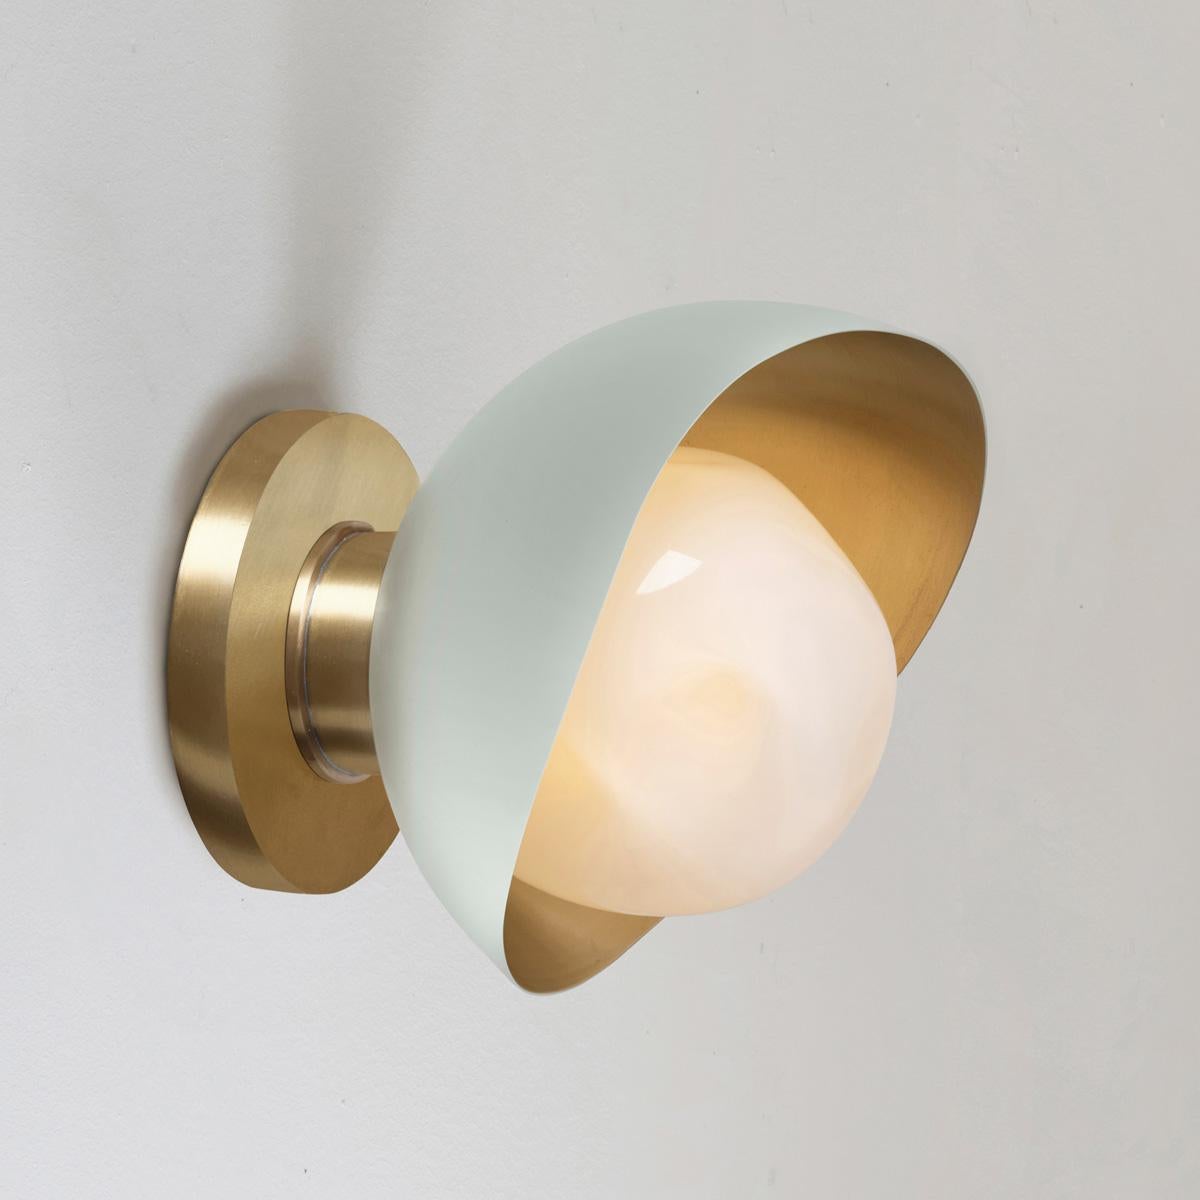 Perla Mini Wall Light by Gaspare Asaro. Powder Pink and Satin Brass Finish For Sale 3